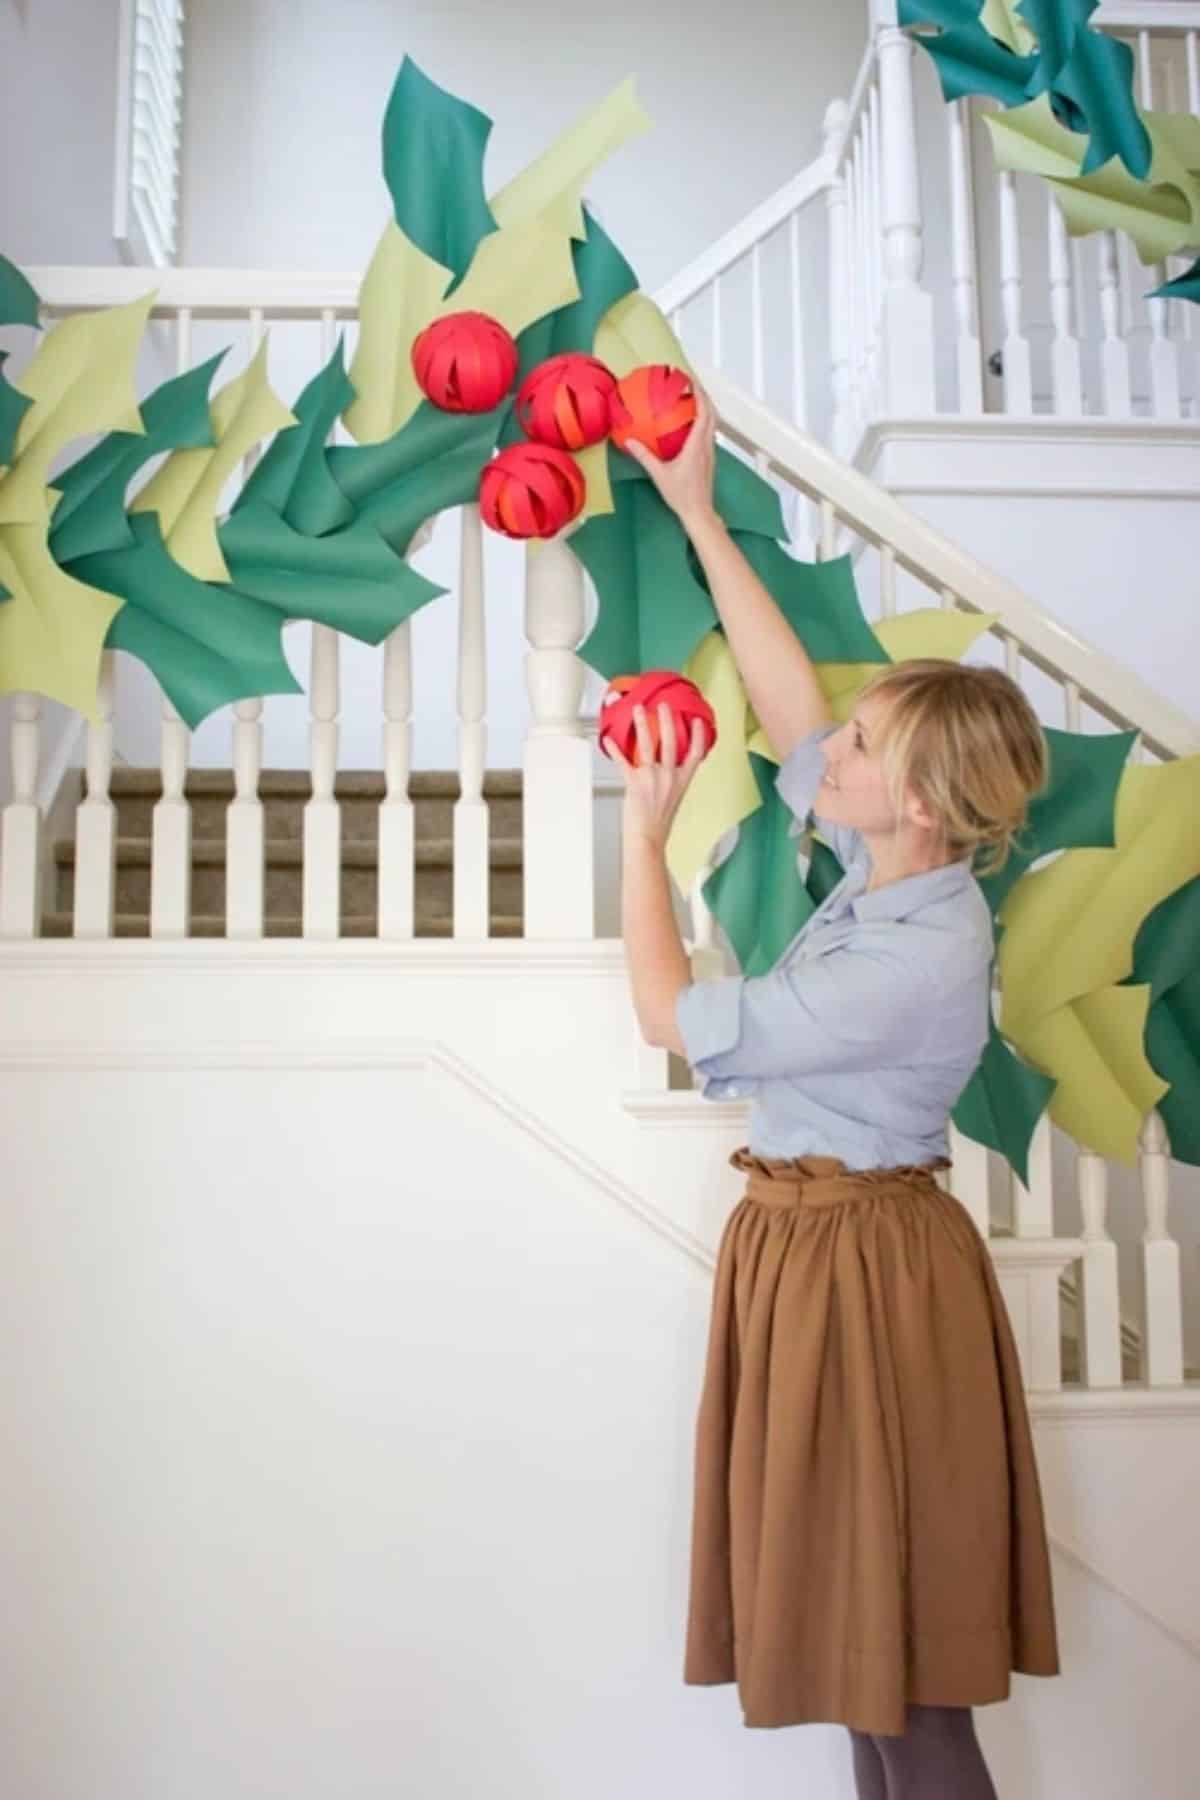 Oversized Holly and Berry Garland Decor